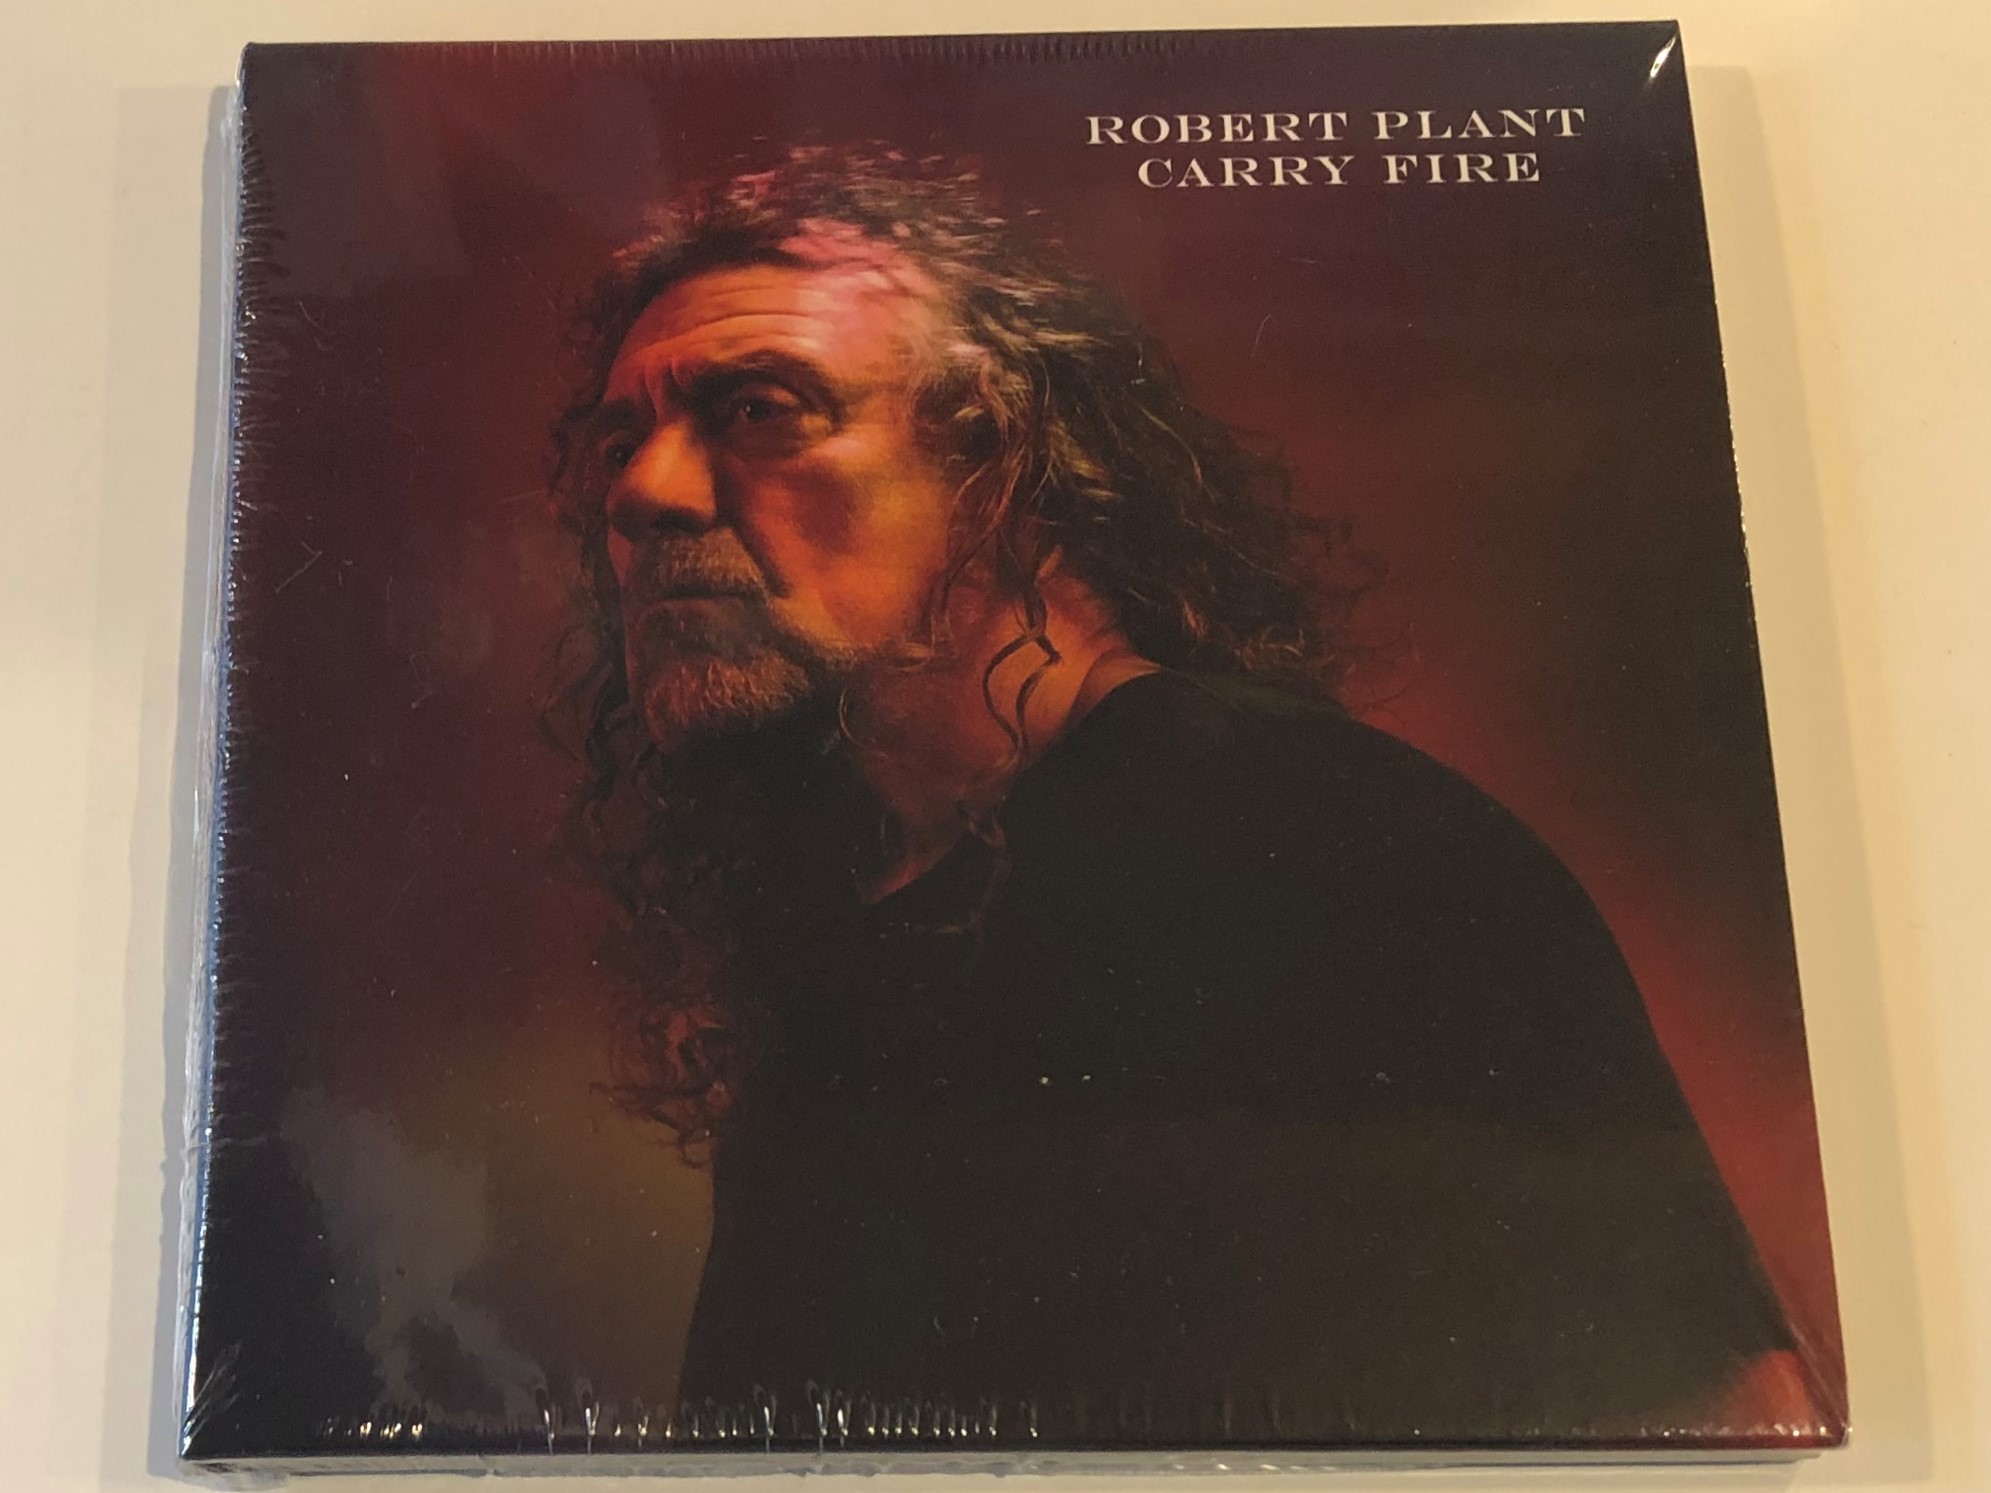 robert-plant-carry-fire-nonesuch-records-audio-cd-2017-075597934939-1-.jpg